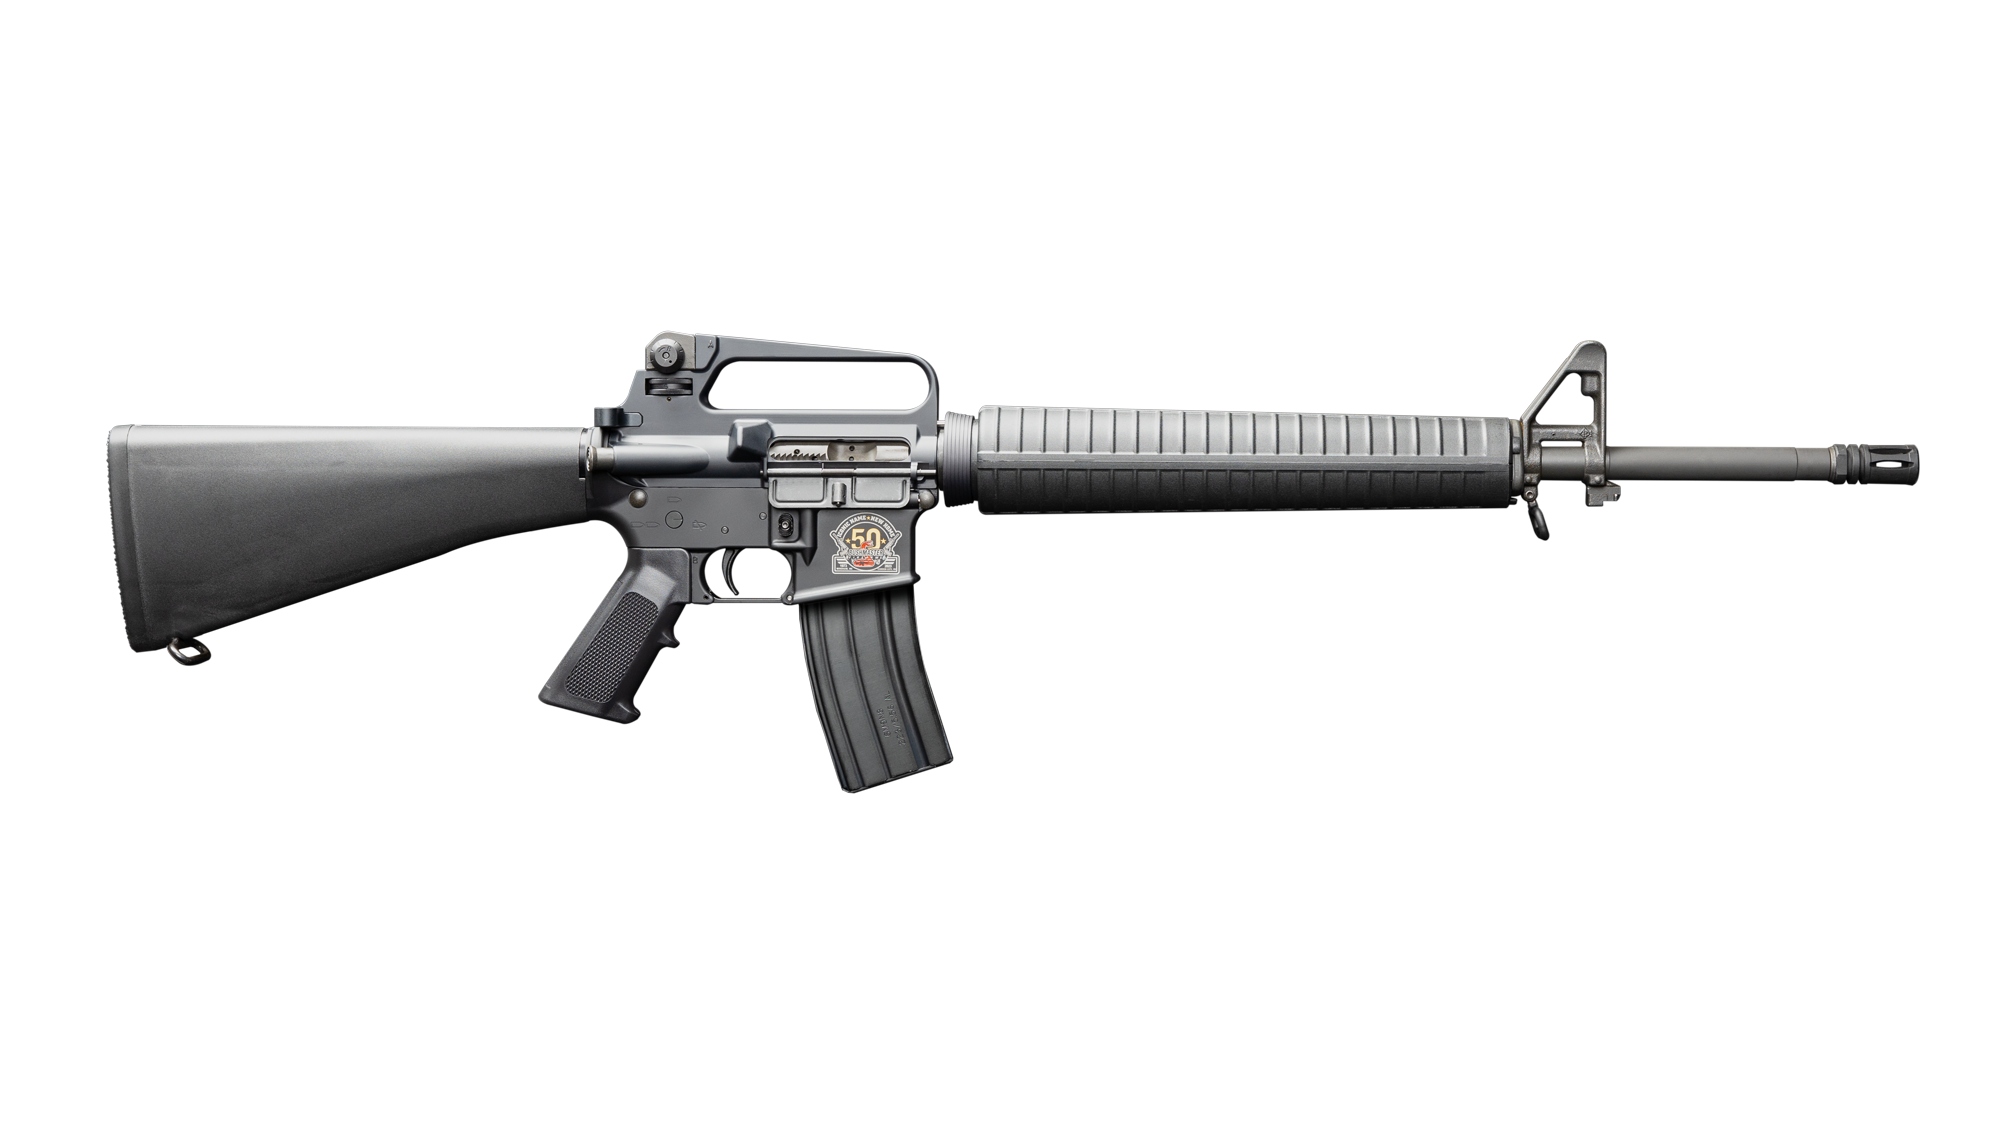 The Limited Edition XM15A2 Carry Handle Rifle from Bushmaster 